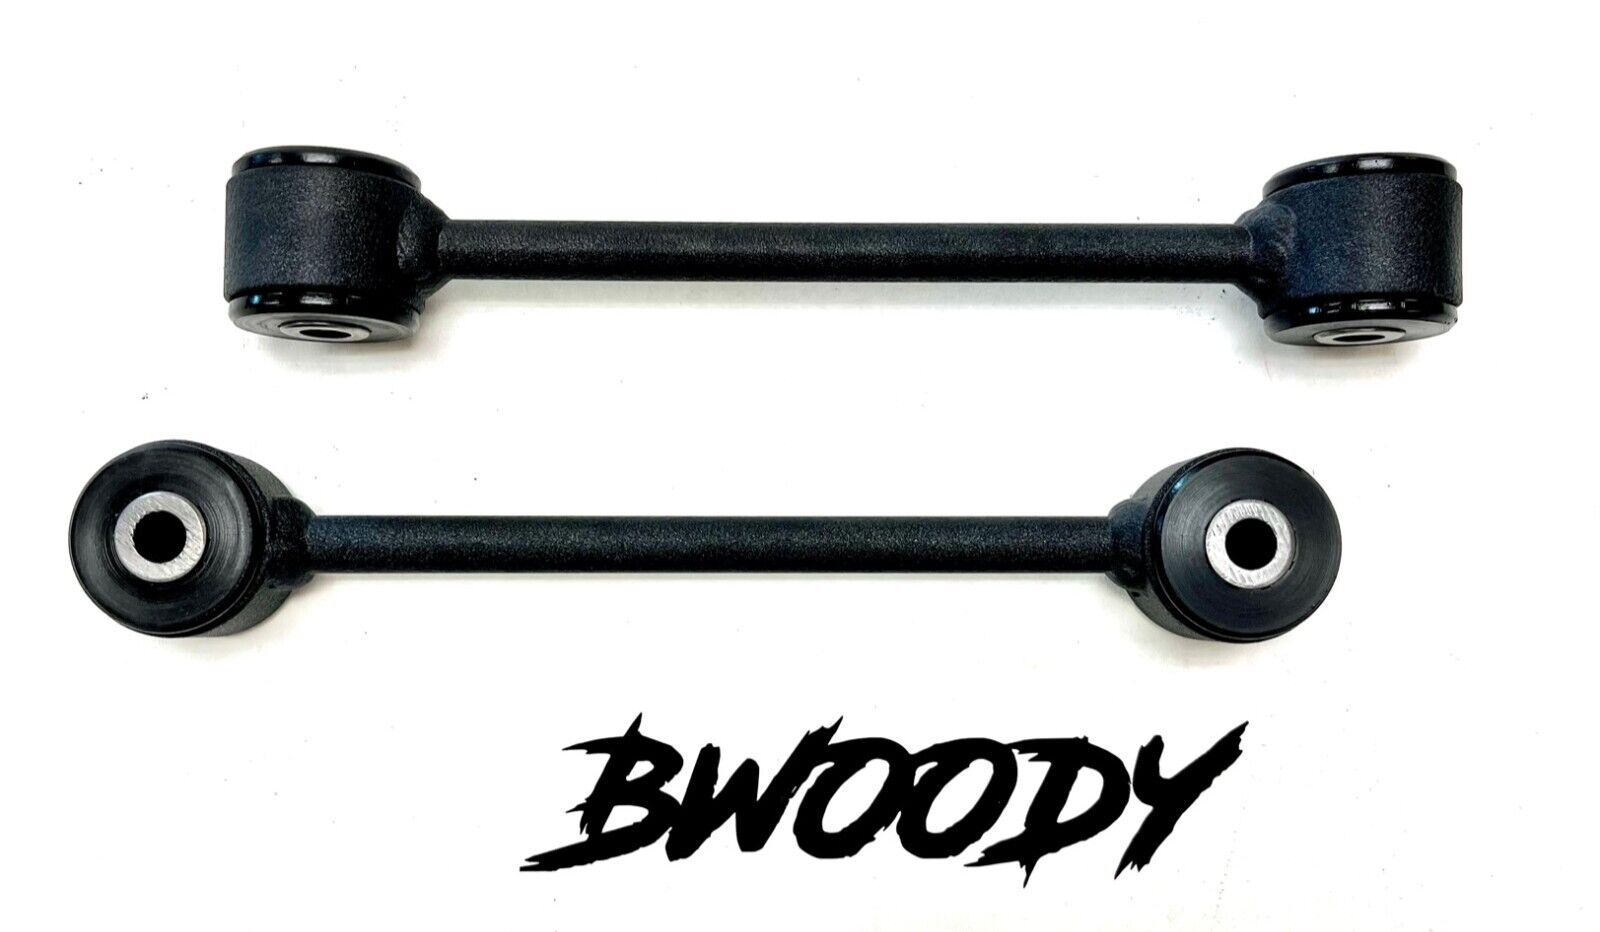 BWoody Shorter Rear links for Charger Challenger Fits 6.2L , 6.4L, 5.7L (RWD)